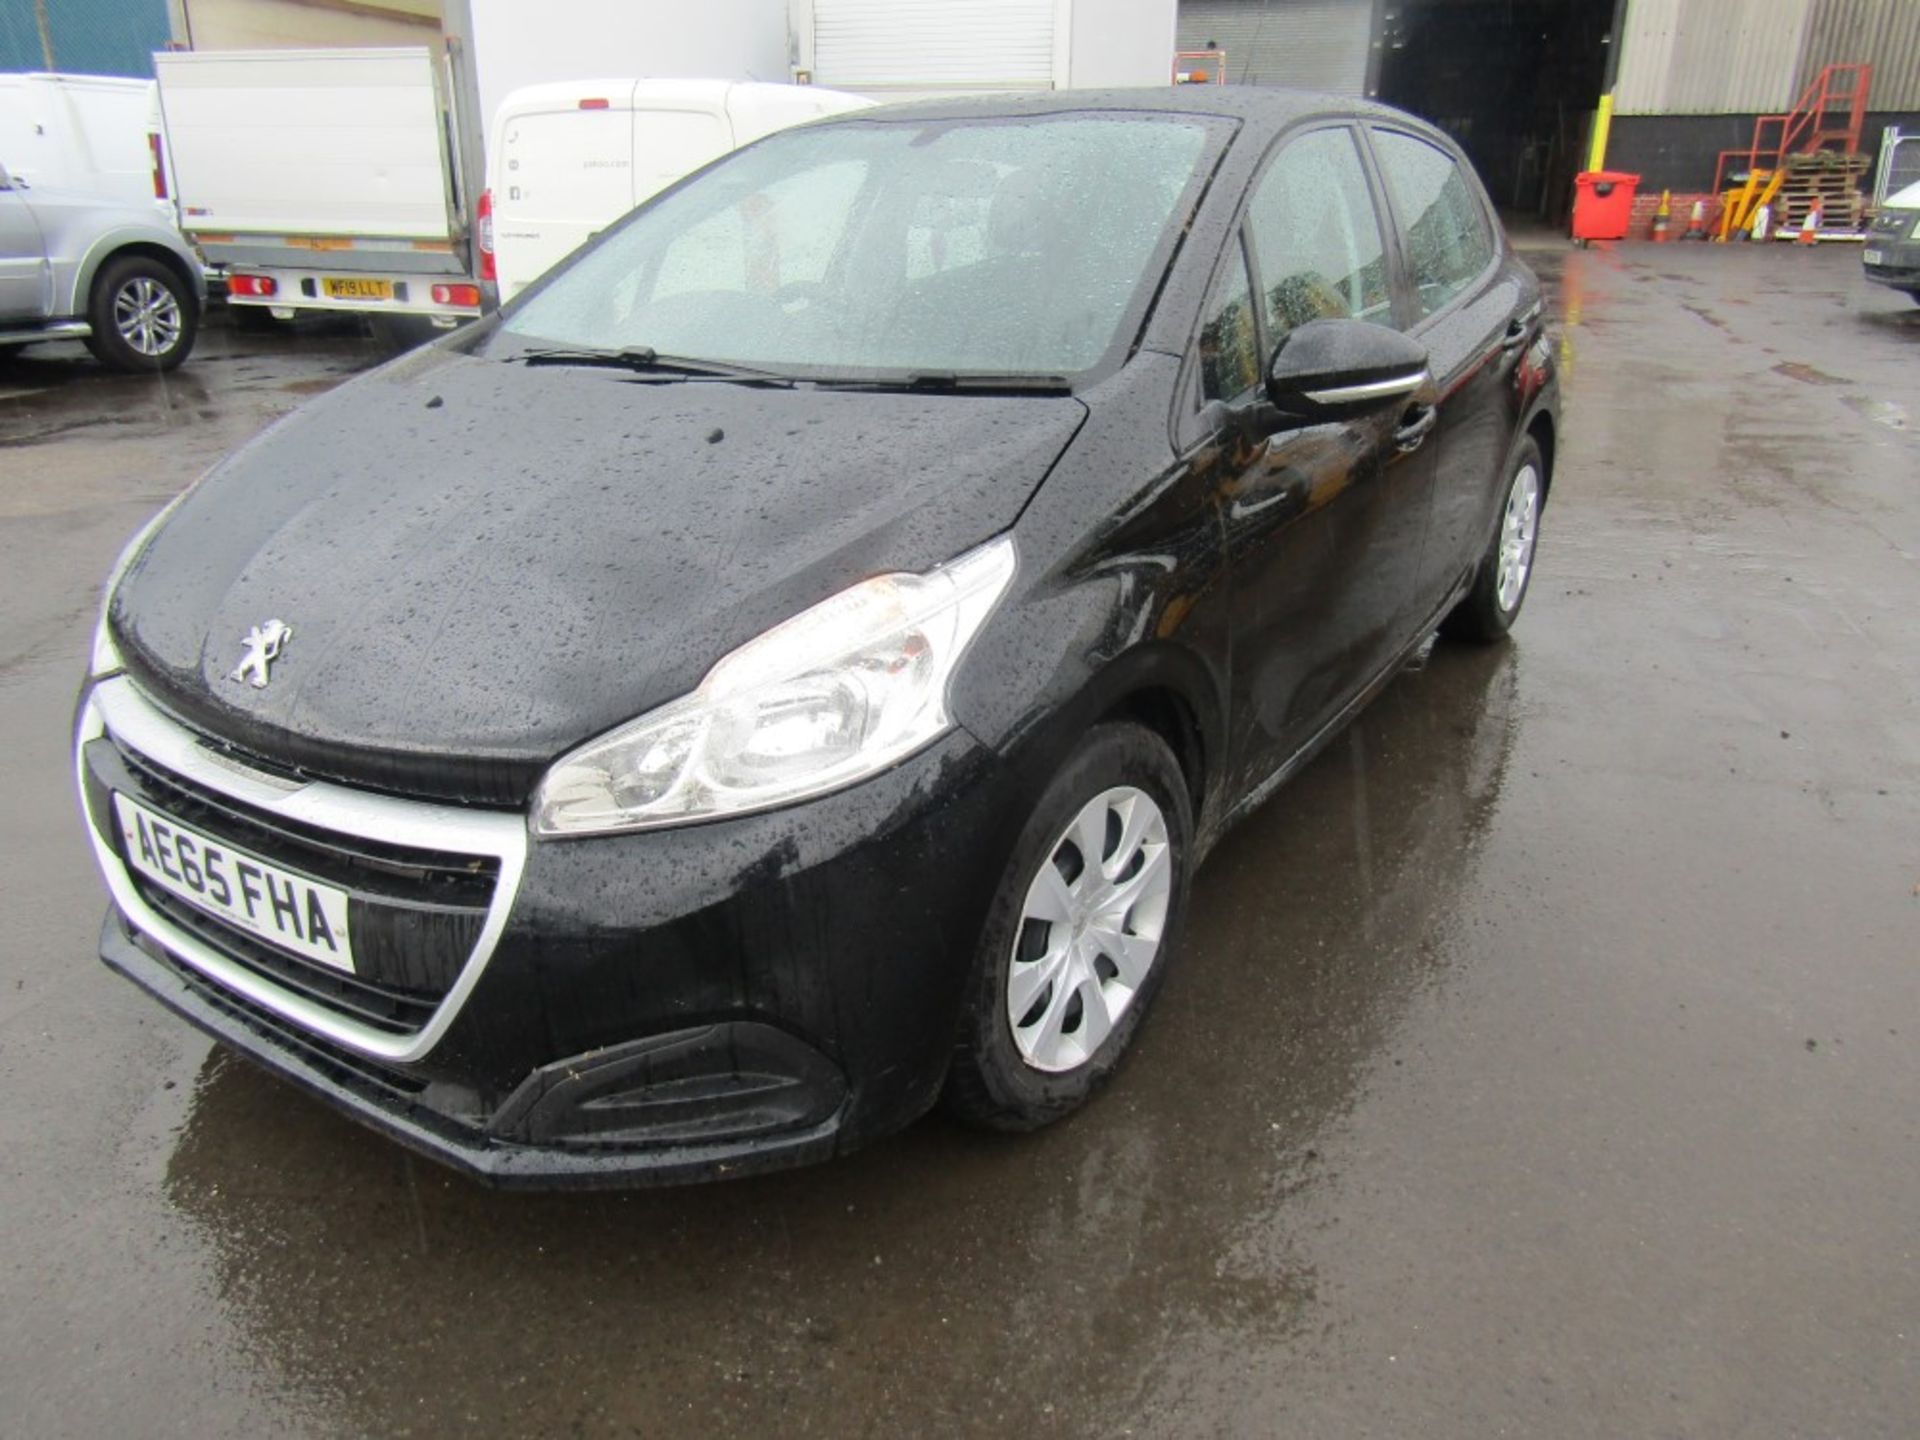 65 reg PEUGEOT 208 HDI, 1ST REG 02/16, 117984M WARRANTED, V5 HERE, 1 OWNER FROM NEW [NO VAT] - Image 2 of 6